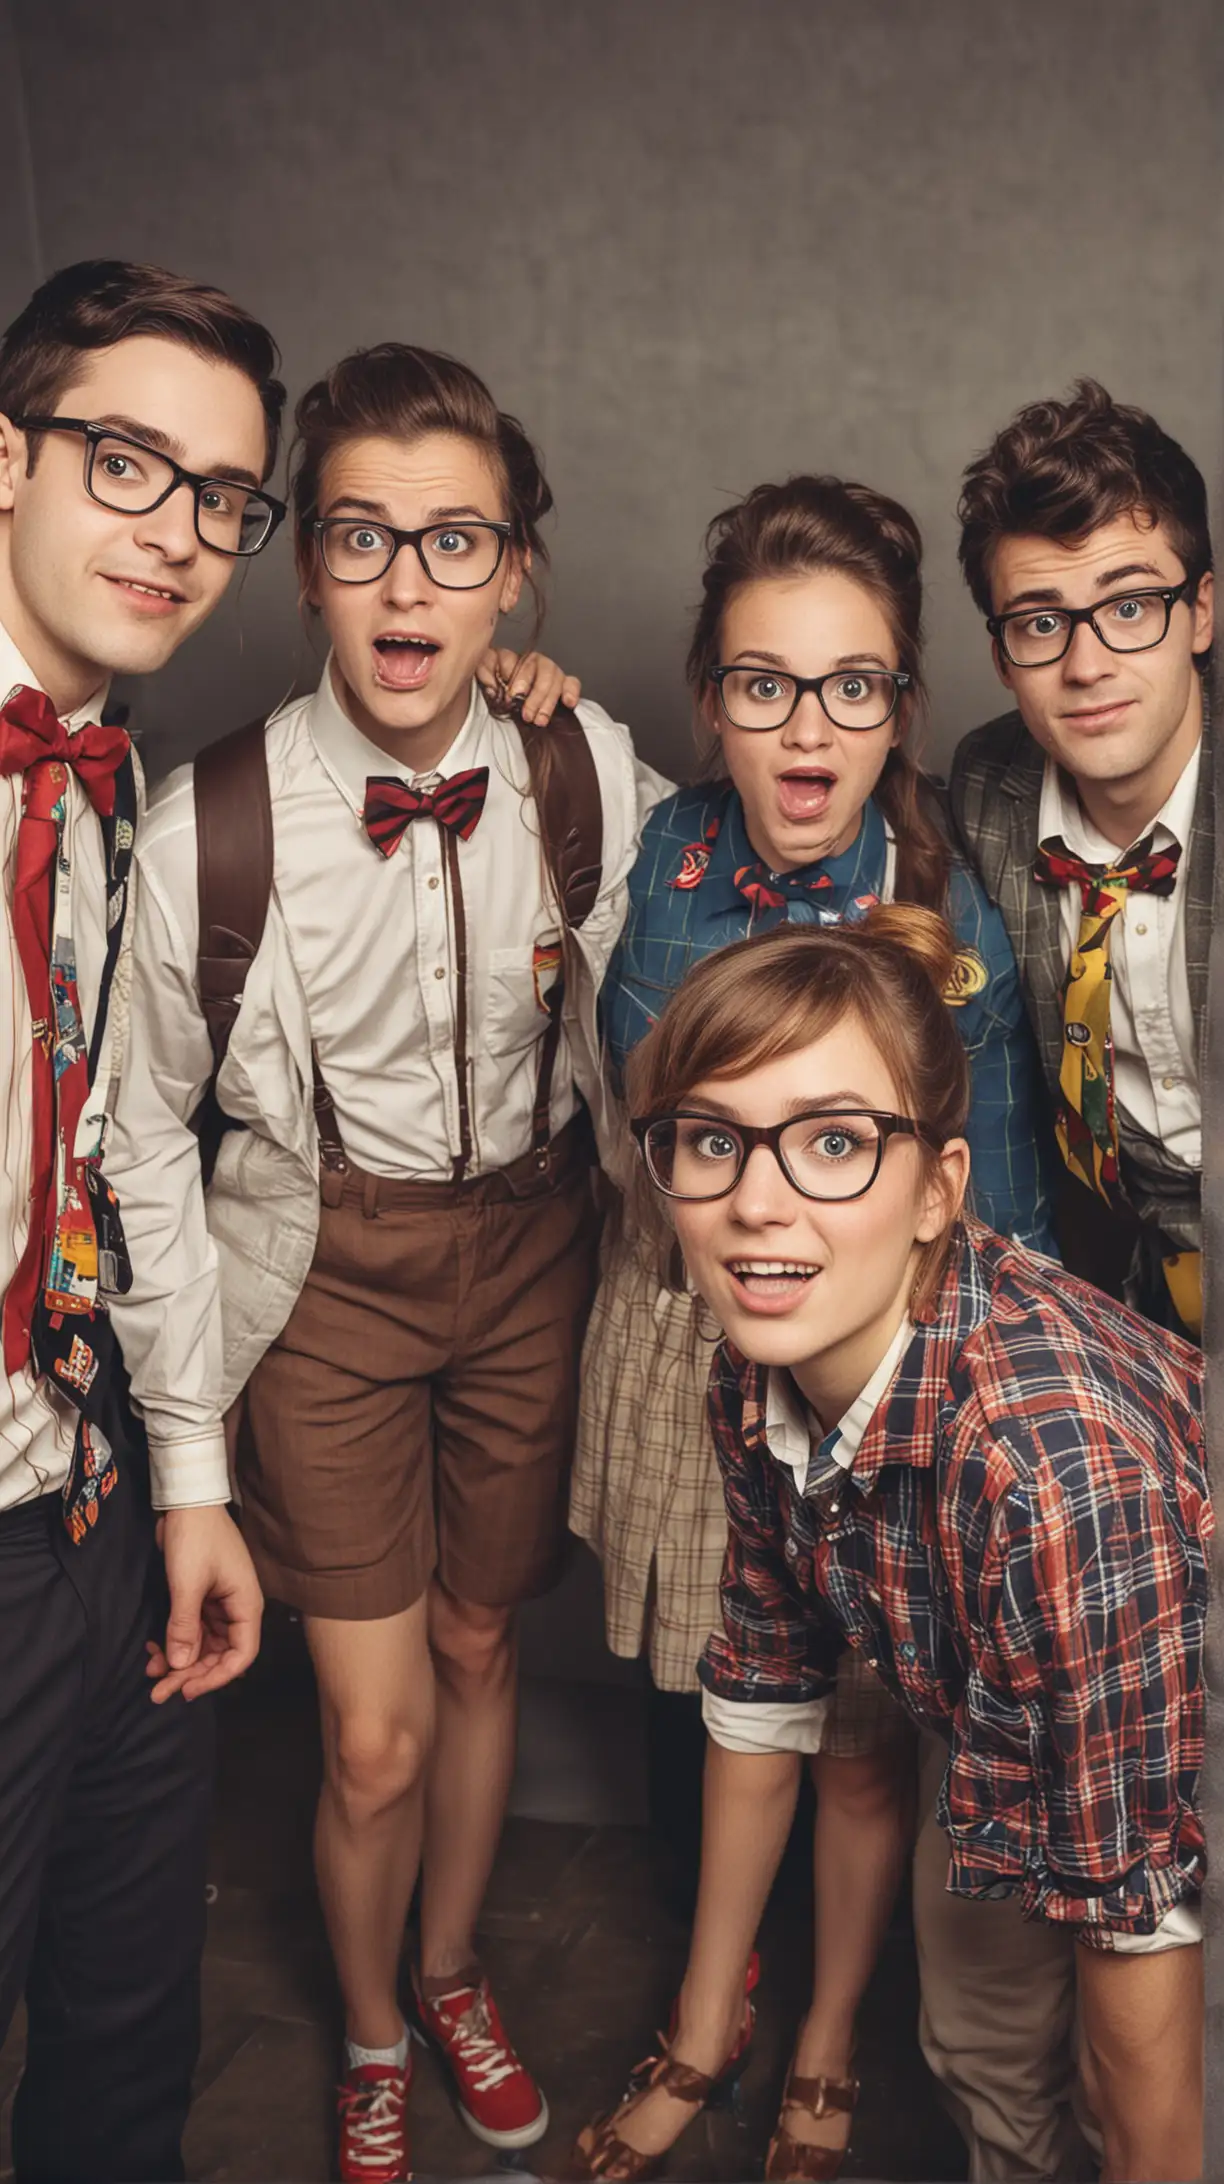 a group of stereotypical nerds, dressed like nerds, at a party